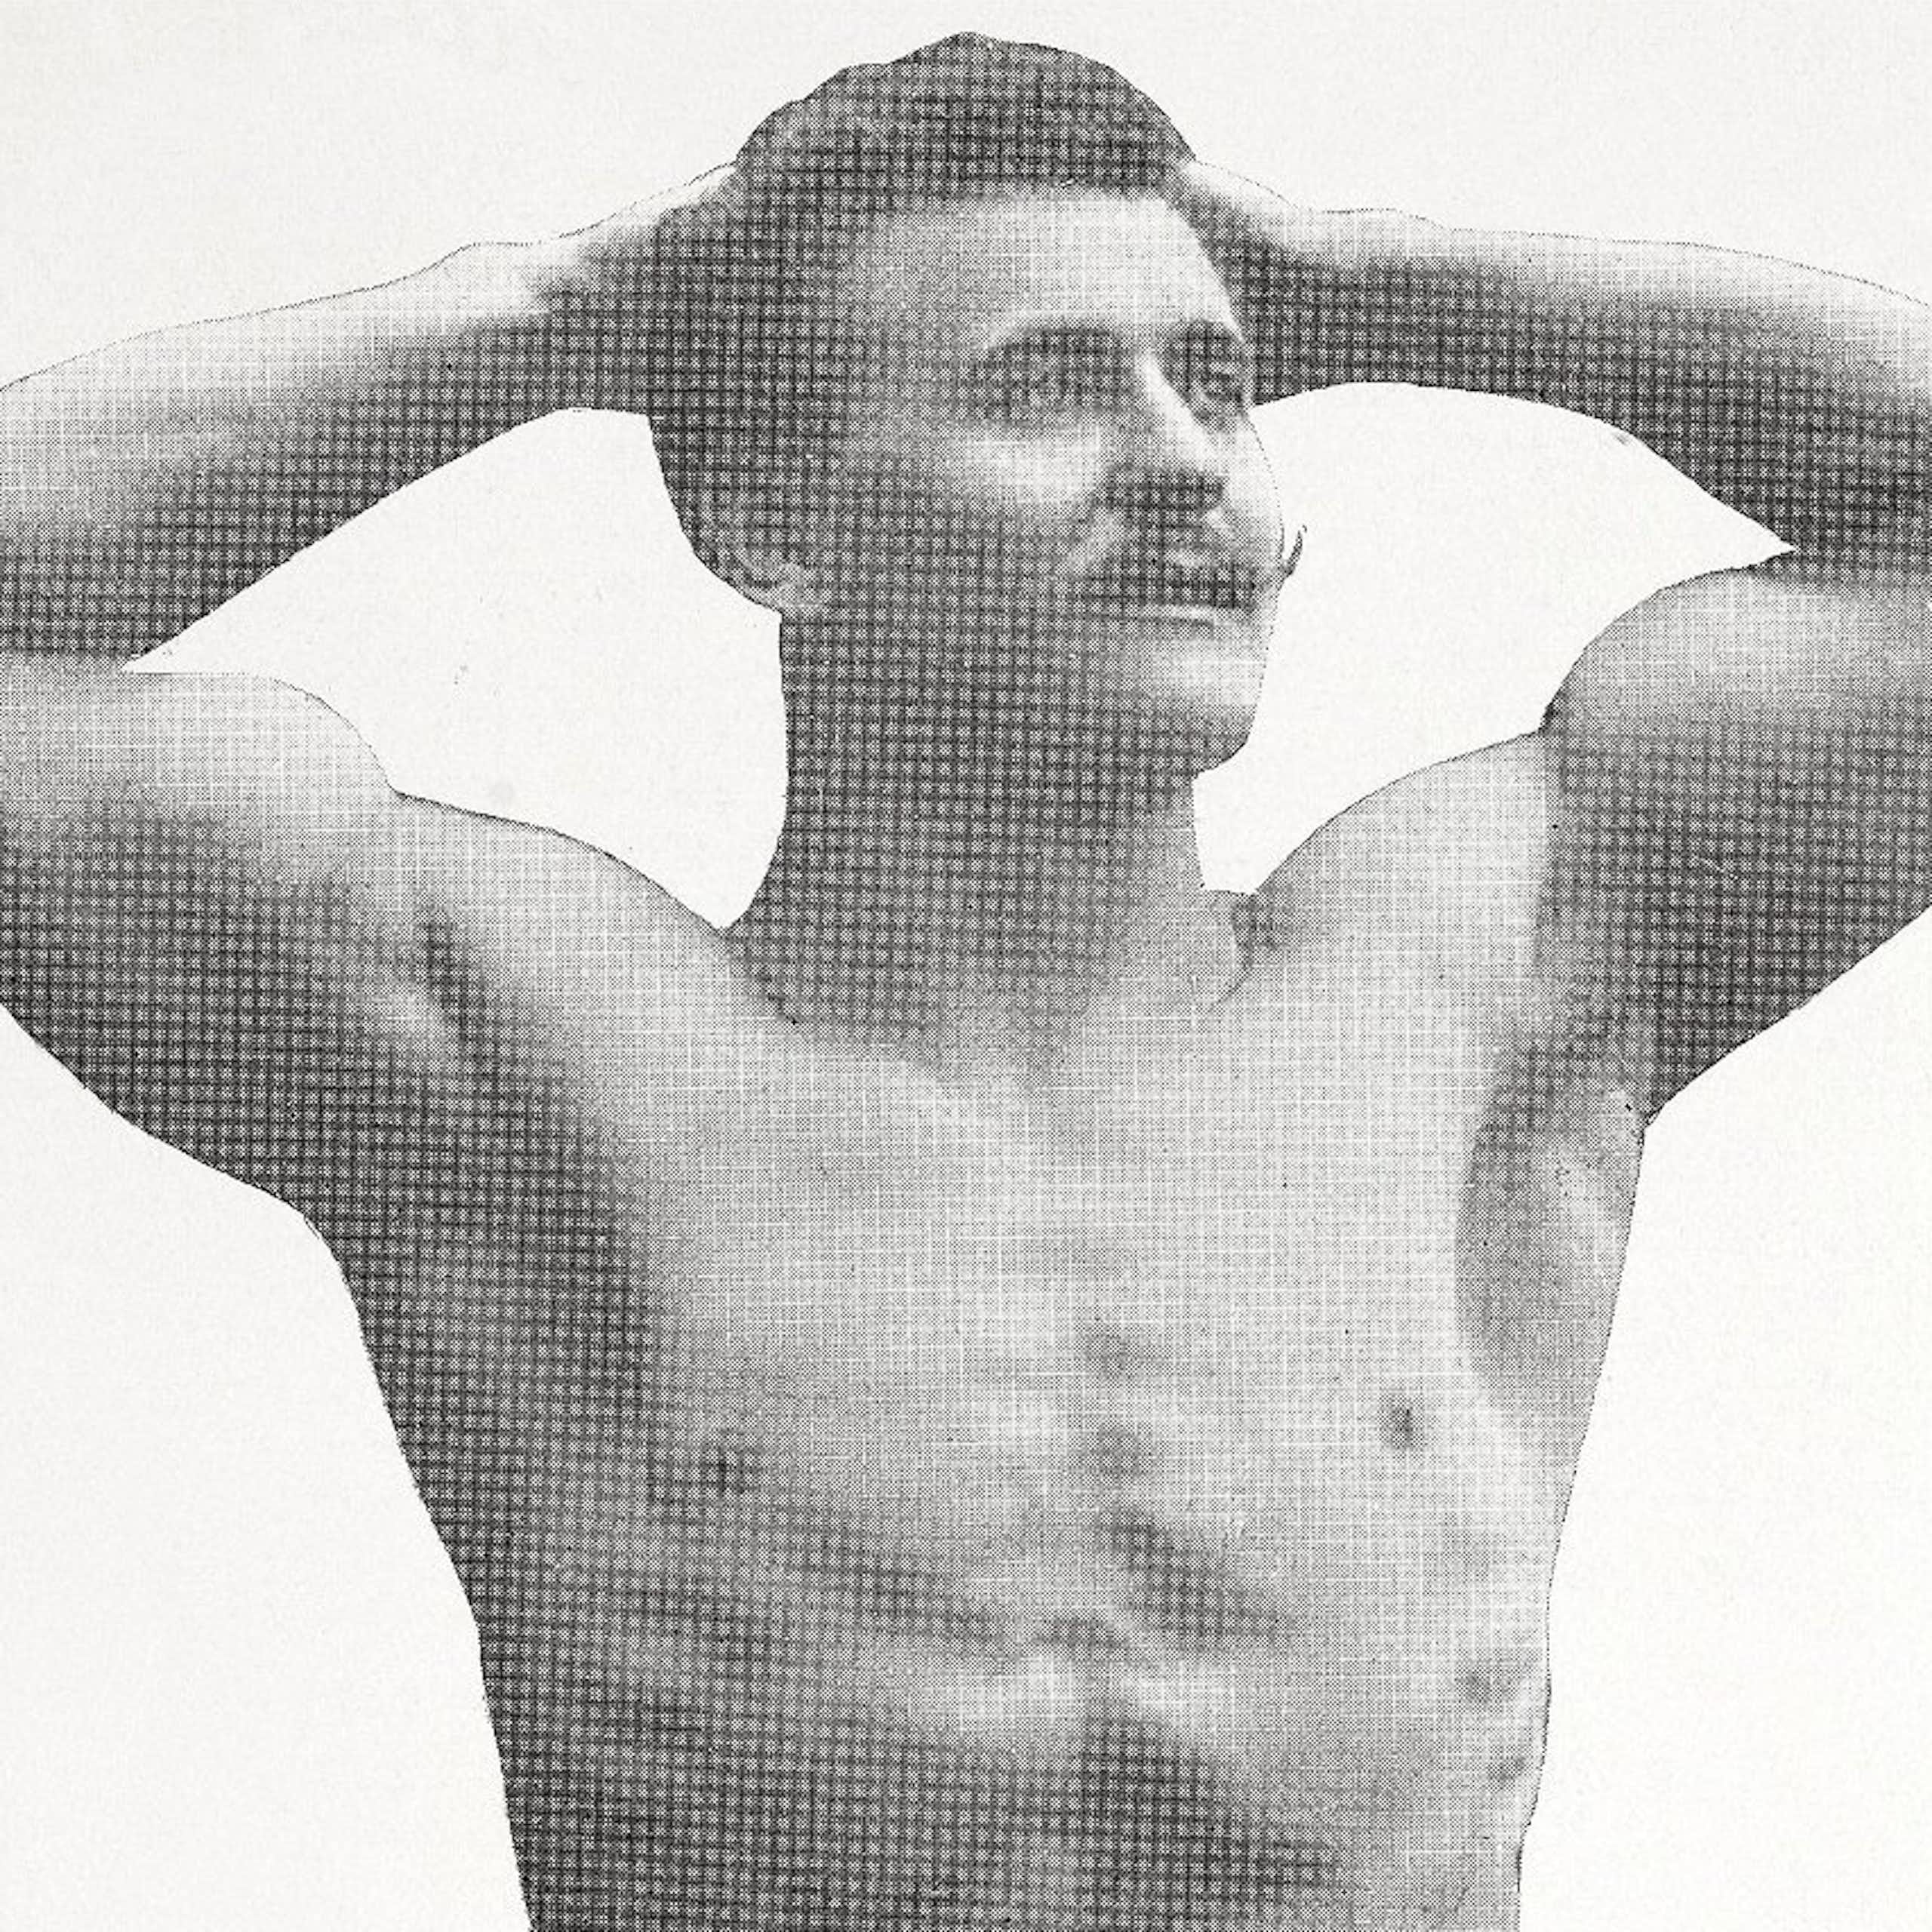 A black and white image of a man with a moustache, shirtless and muscular, his hands behind his head.